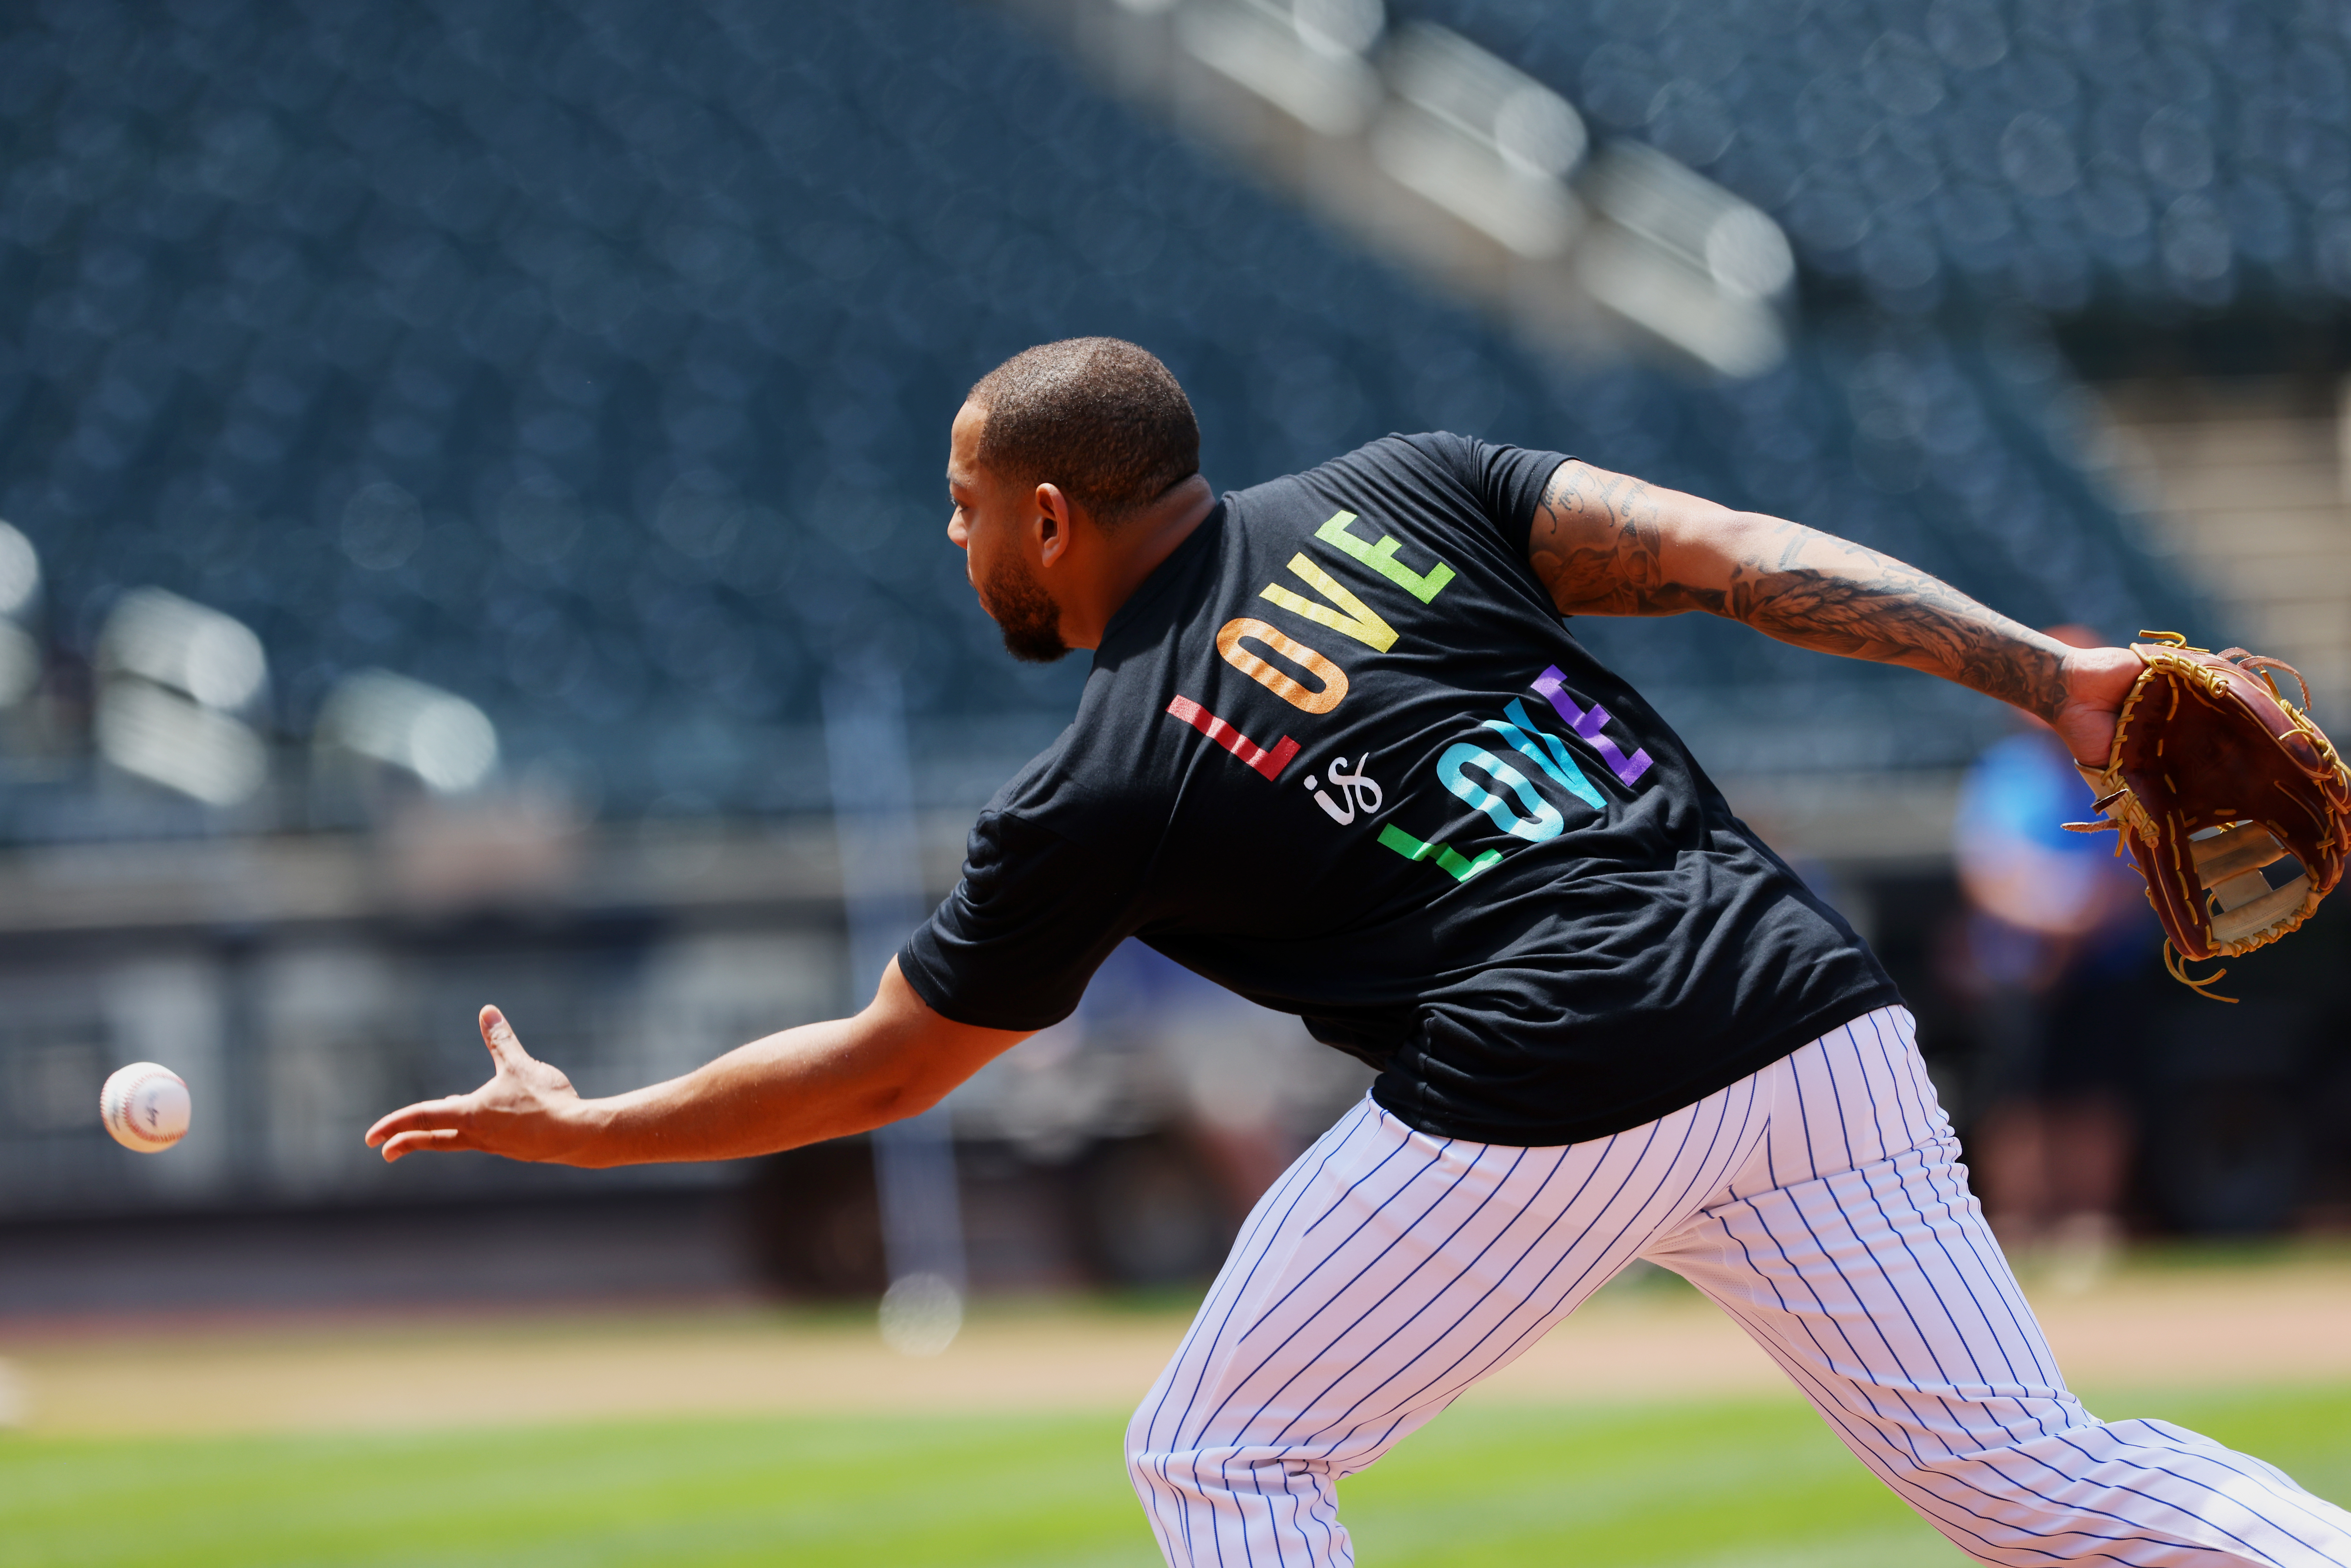 Dominic Smith of the New York Mets warms up with a “Love is Love” shirt in honor of Pride Night before a game against the Philadelphia Phillies at Citi Field on June 25, 2021.